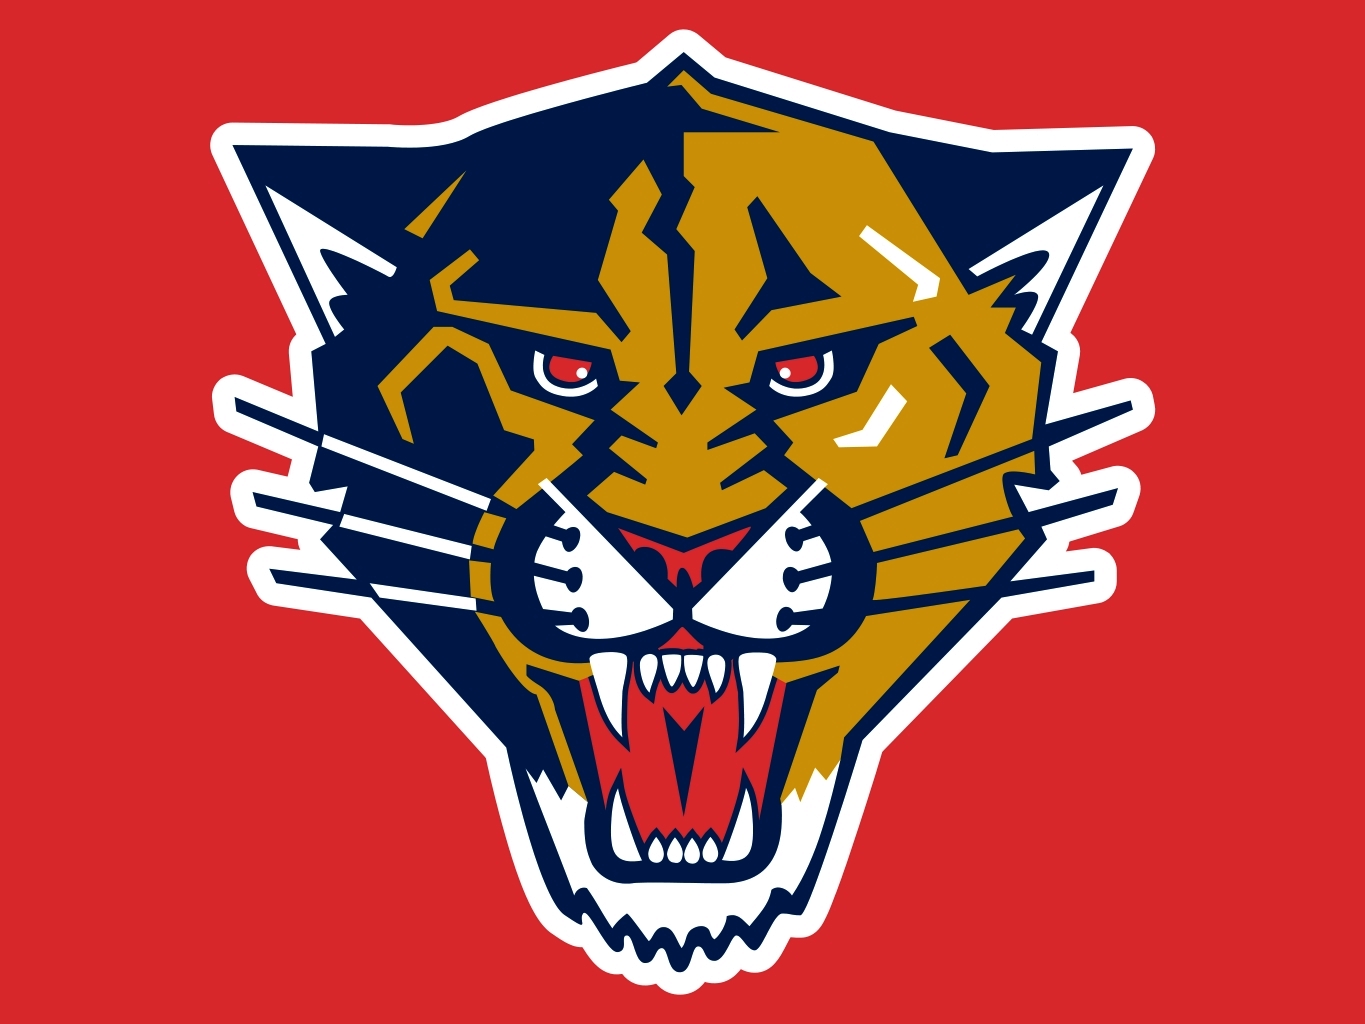 Florida Panthers Backgrounds, Compatible - PC, Mobile, Gadgets| 1365x1024 px